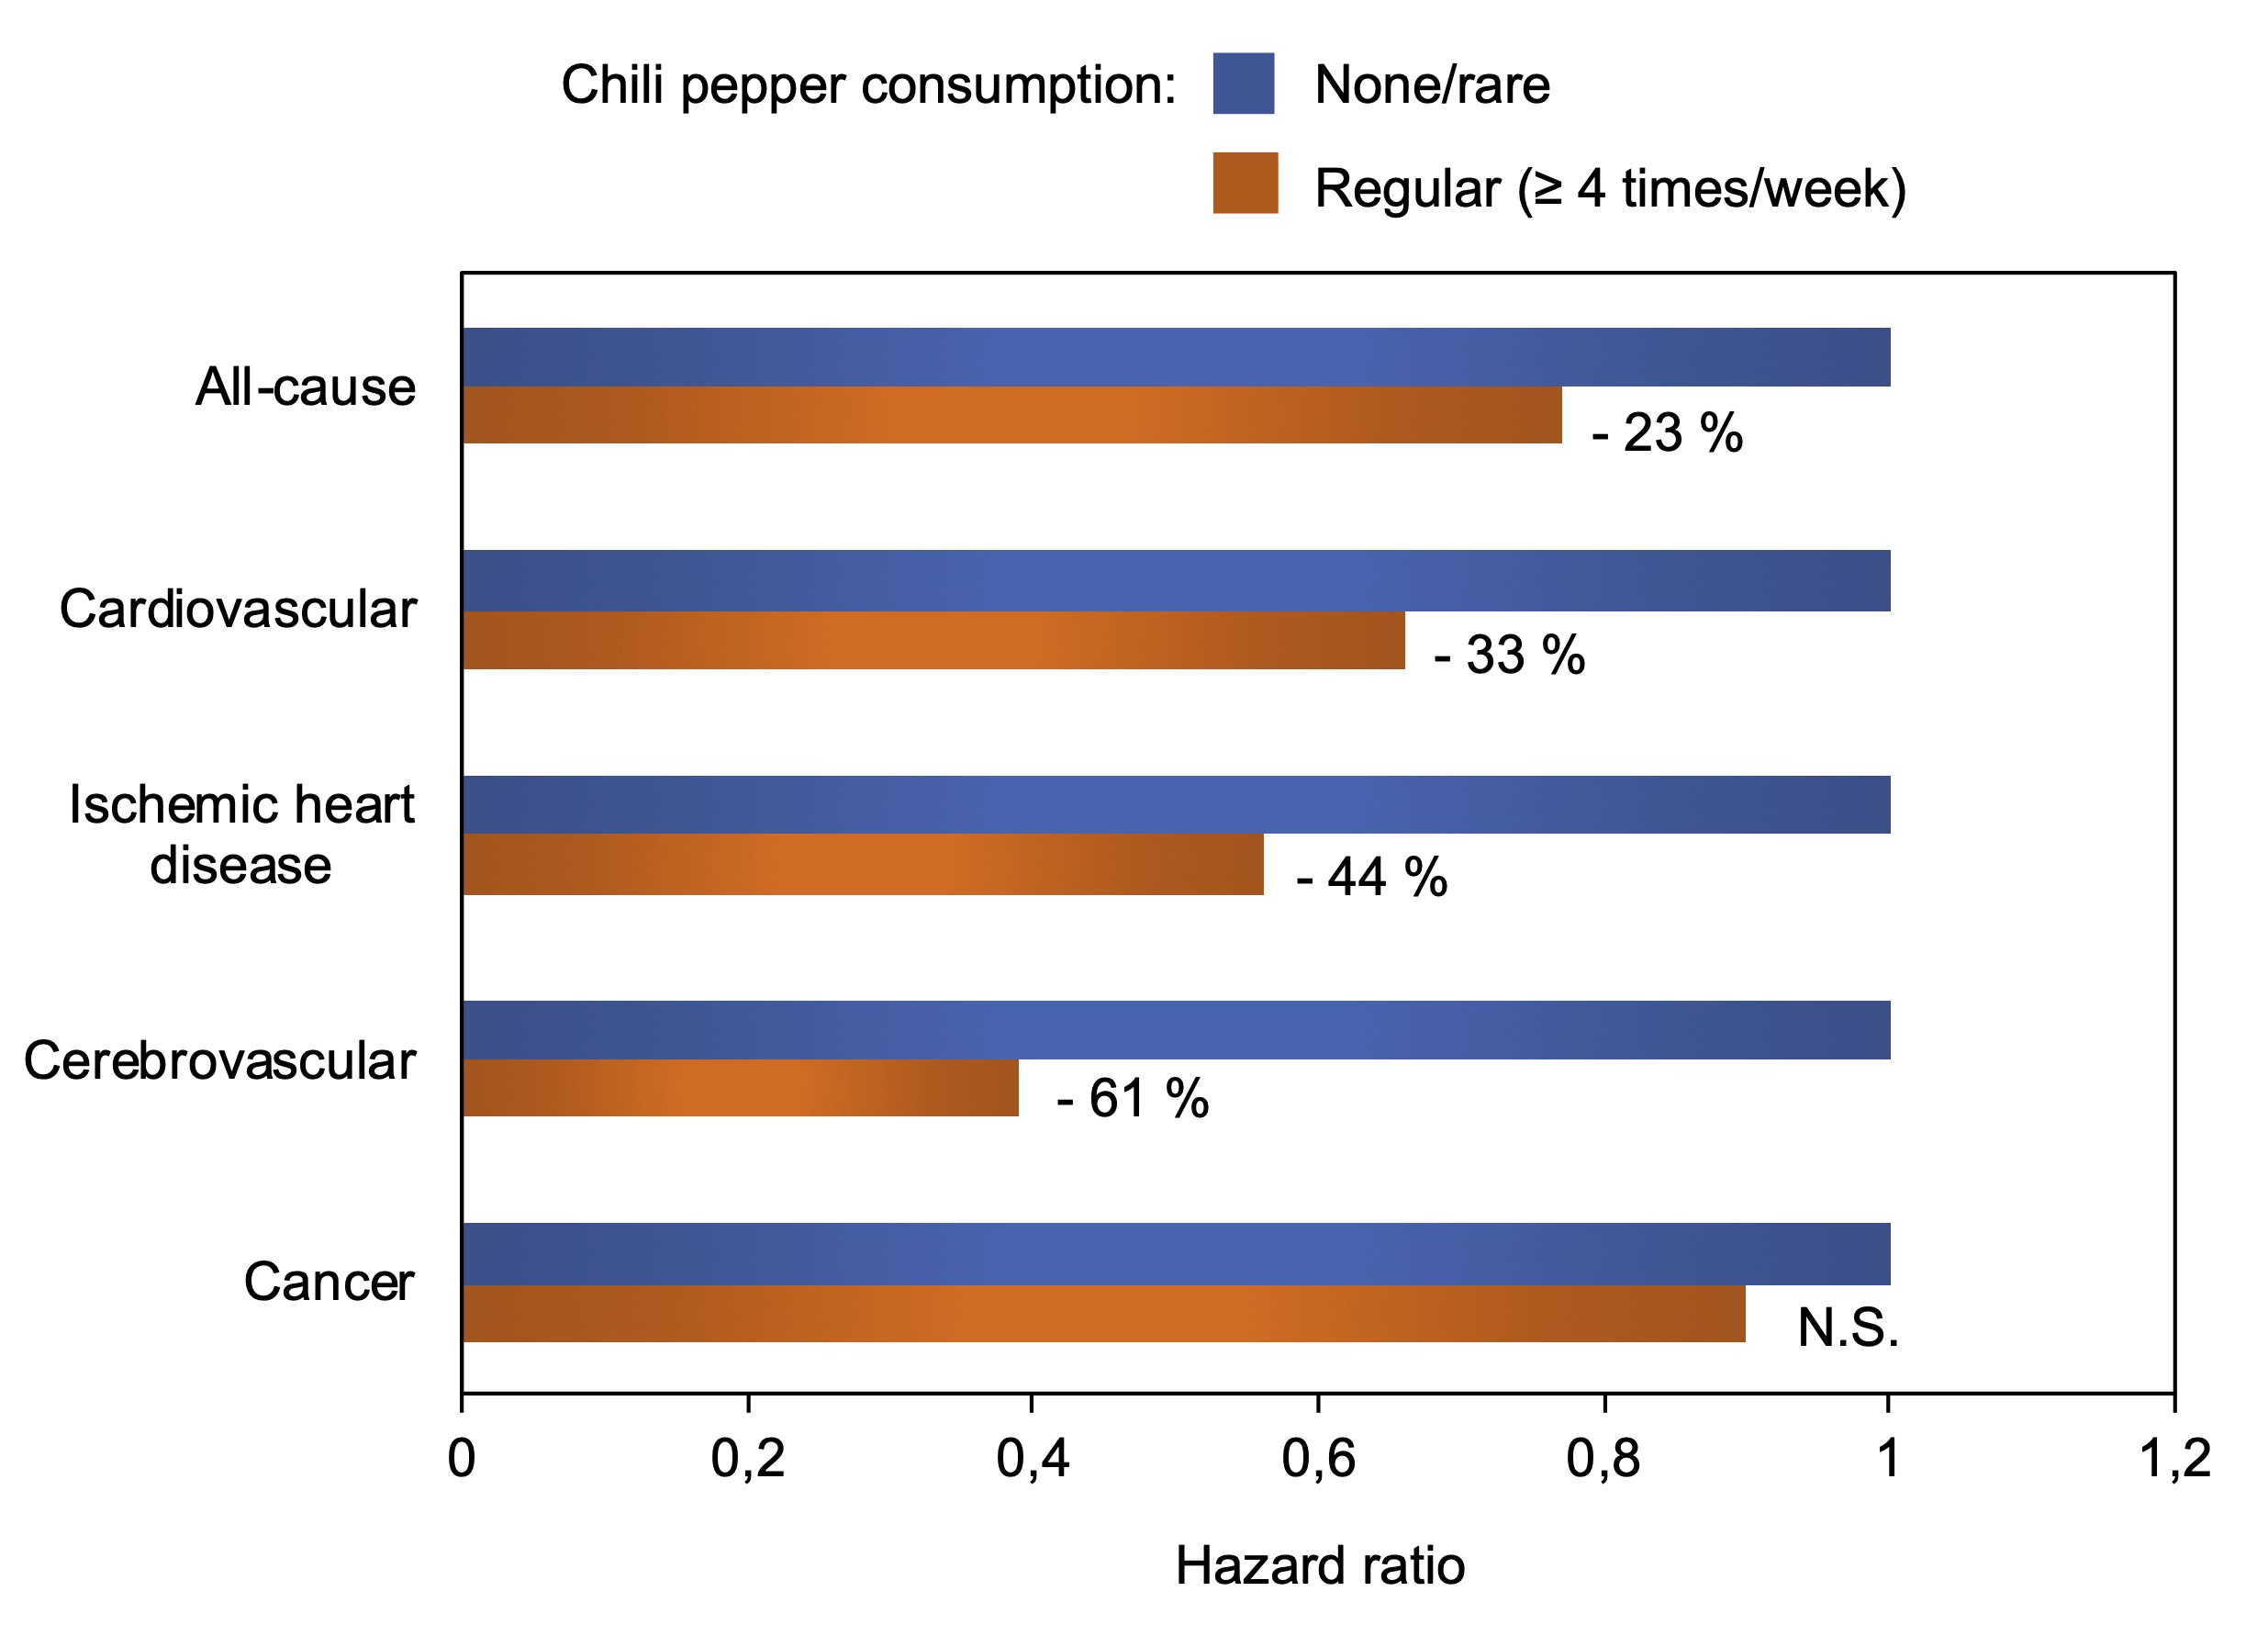 Reduced risk of all-cause mortality and mortality related to various diseases among regular chili pepper consumers.